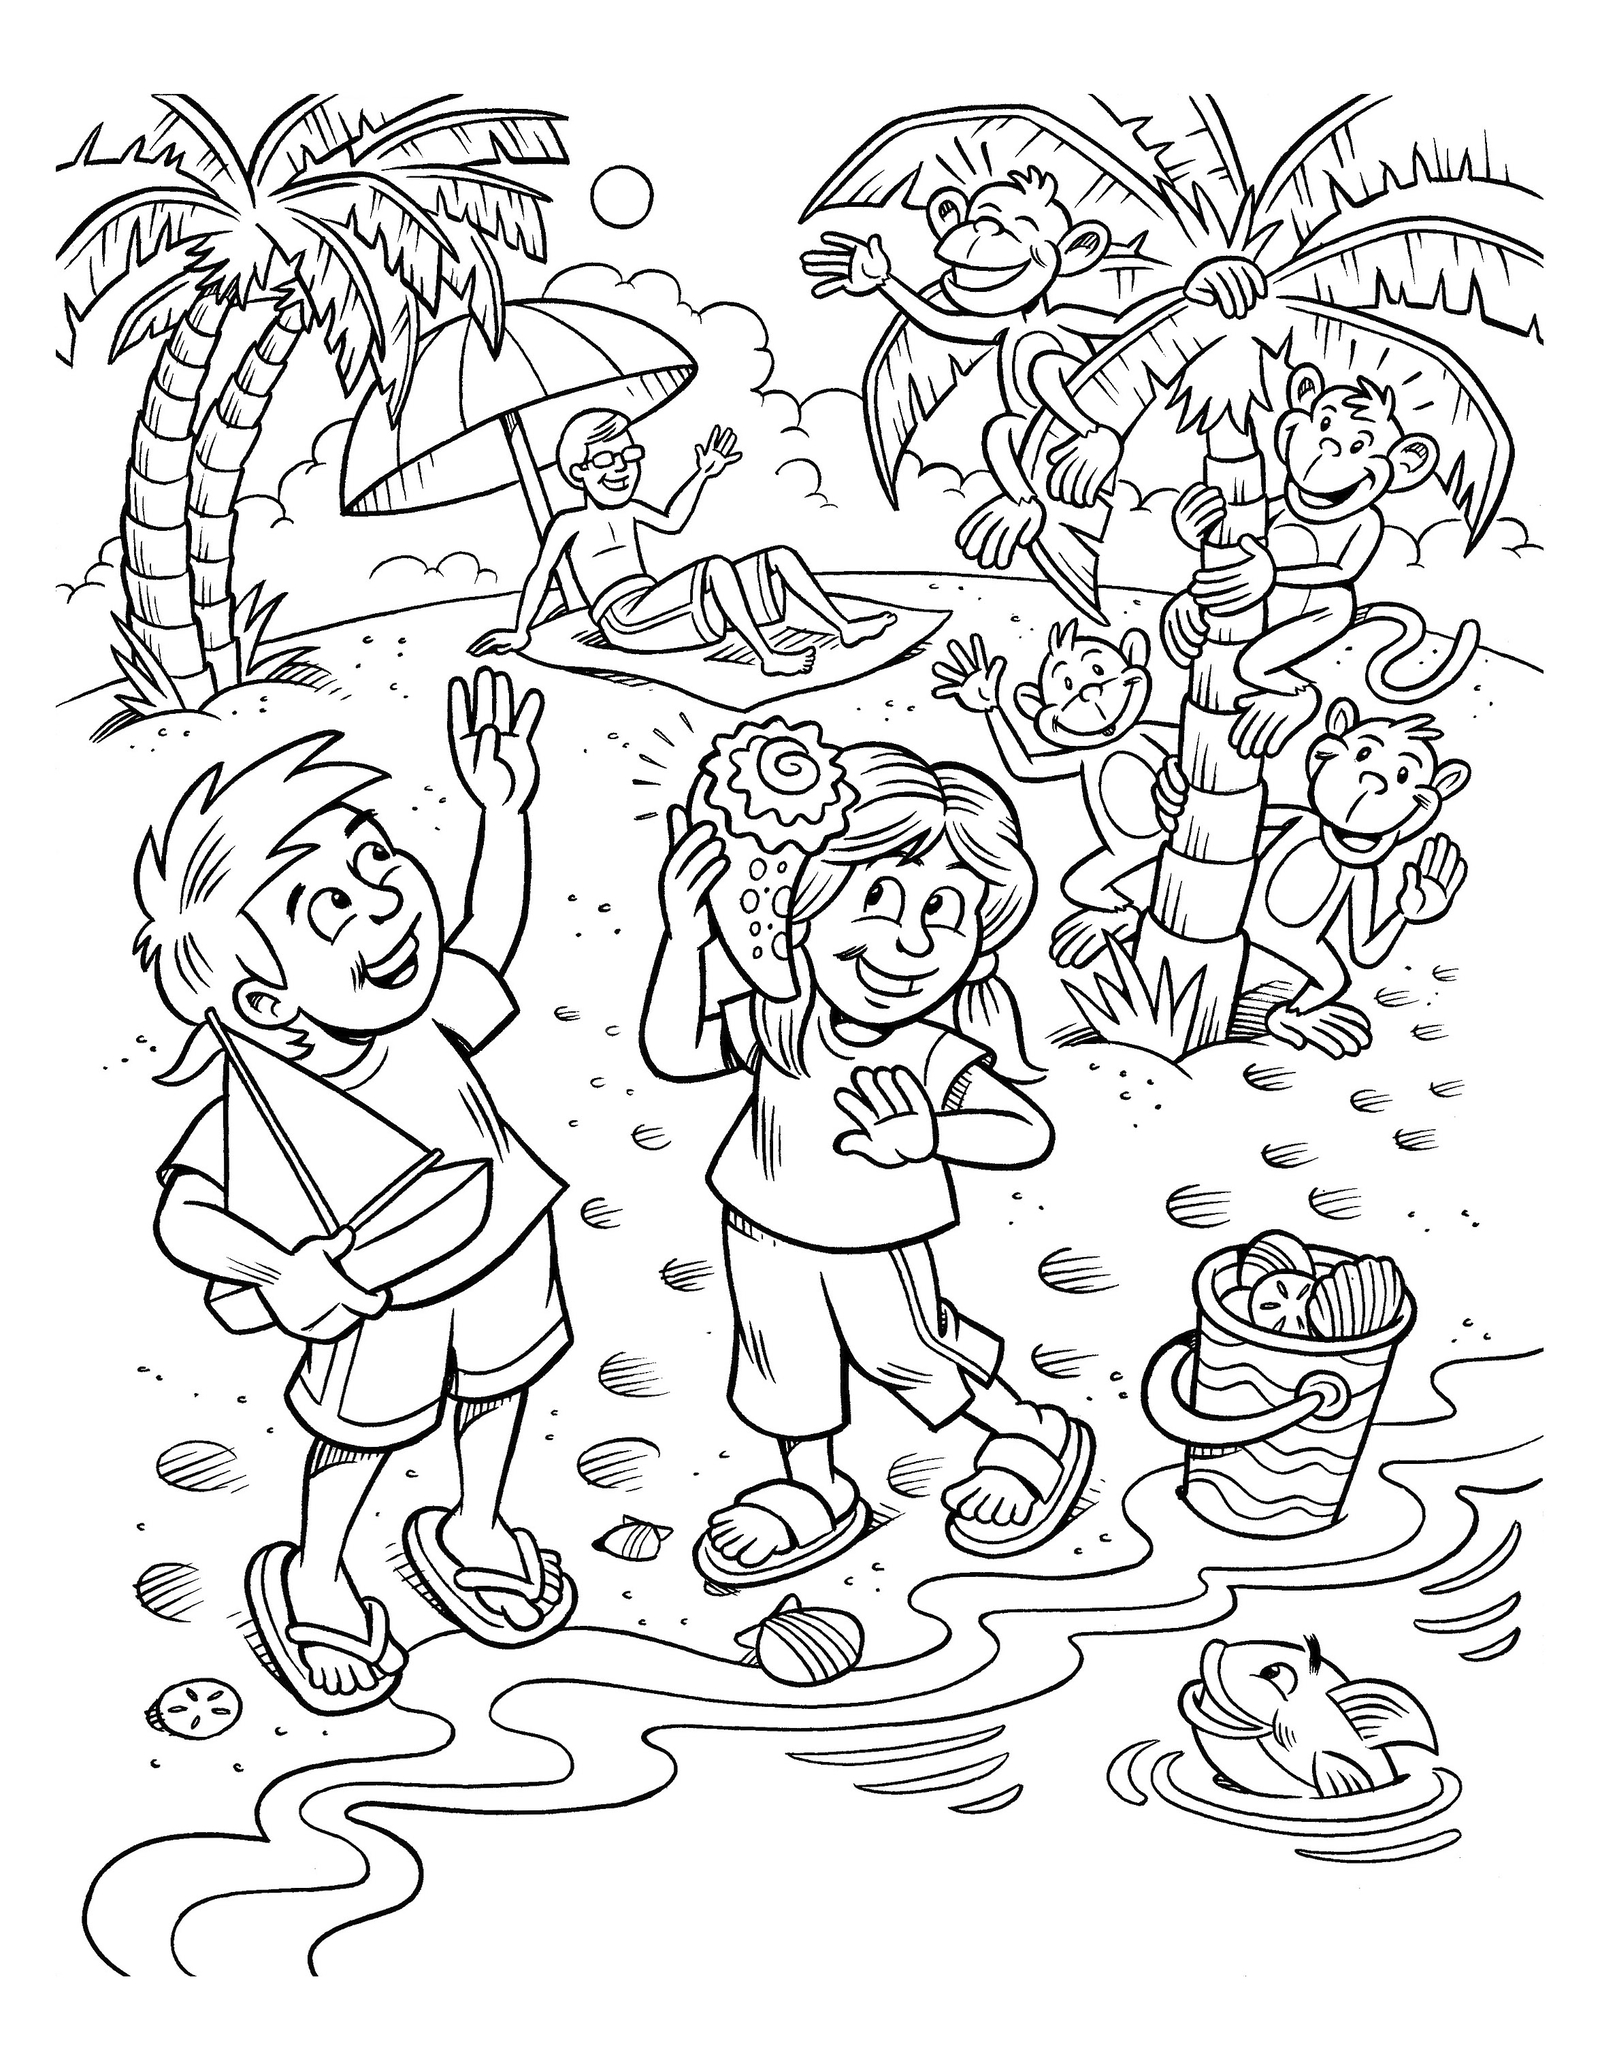 Coloring Pages—General